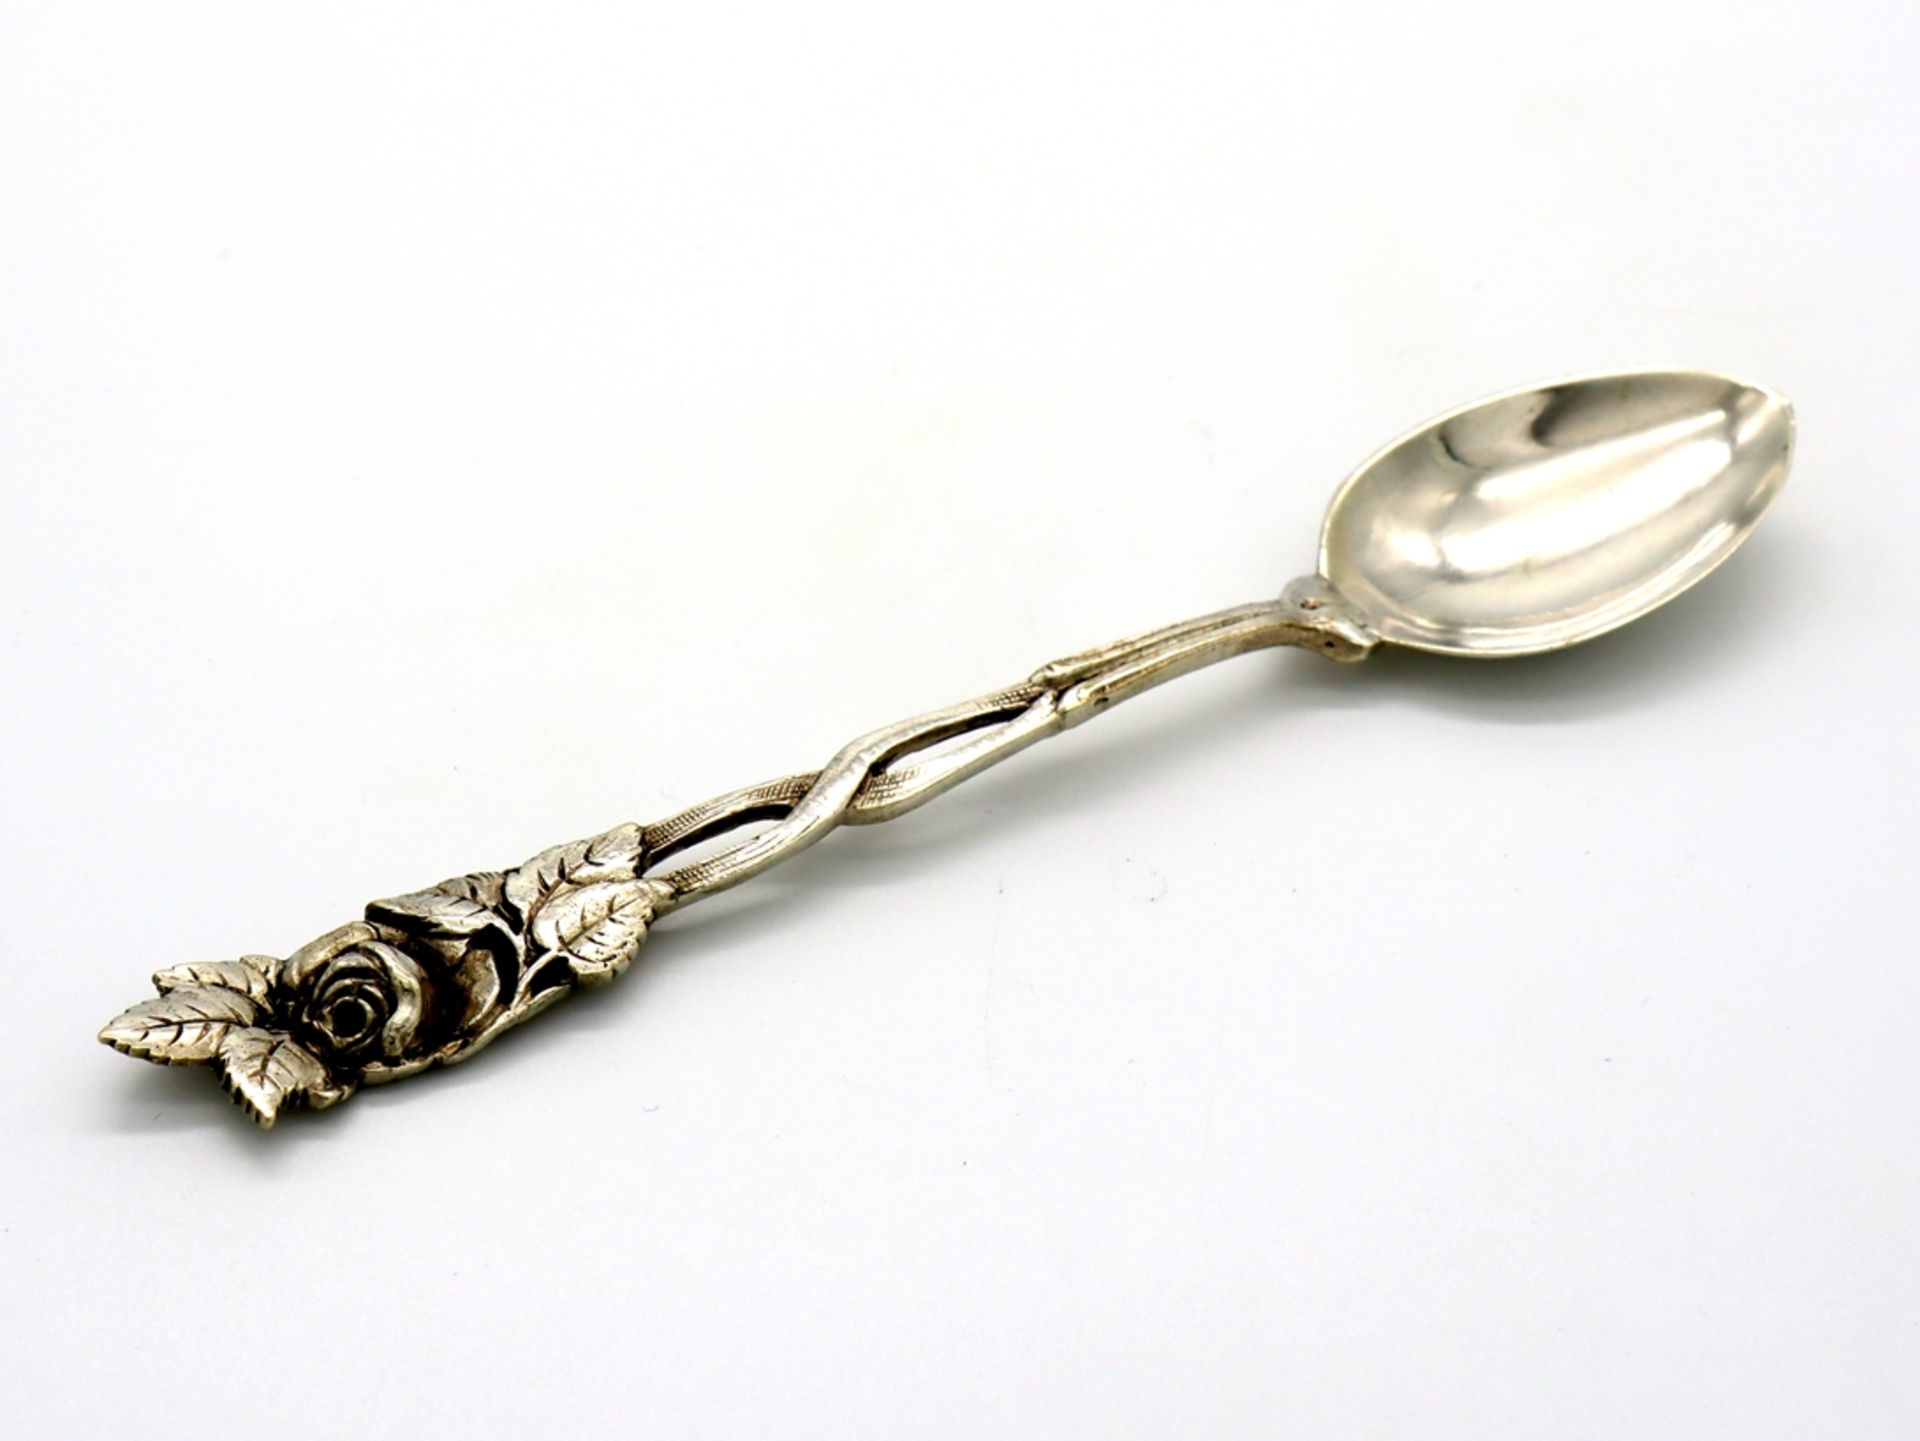 6 dessert spoons Hanauer Rose, 800 silver & 4 dessert spoons silver plated in case. - Image 5 of 8